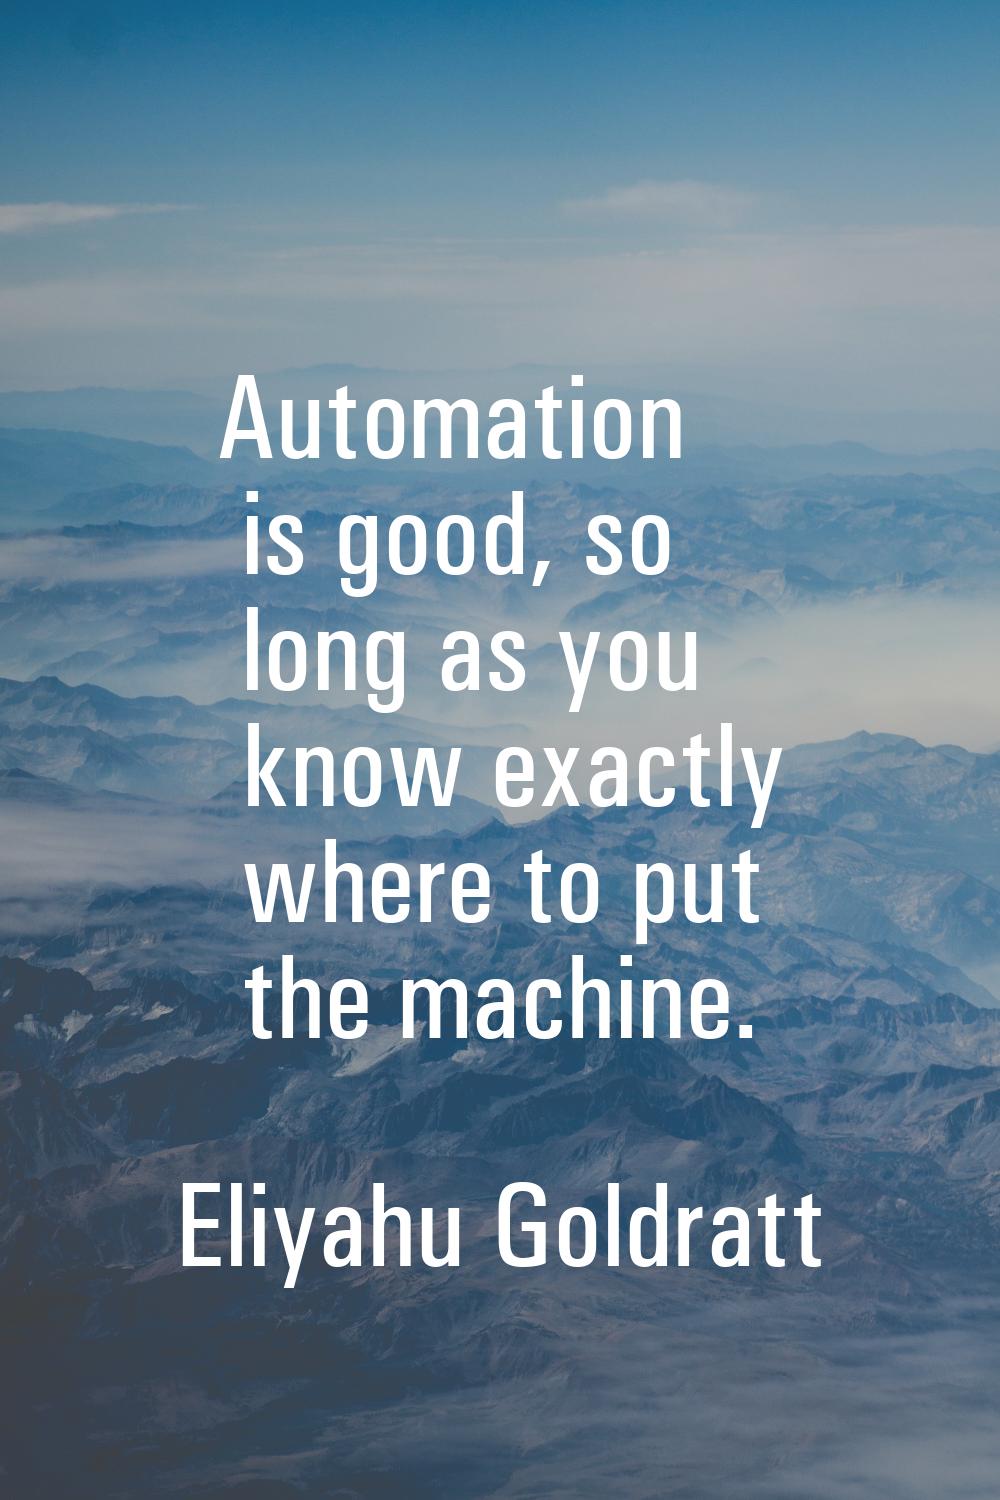 Automation is good, so long as you know exactly where to put the machine.